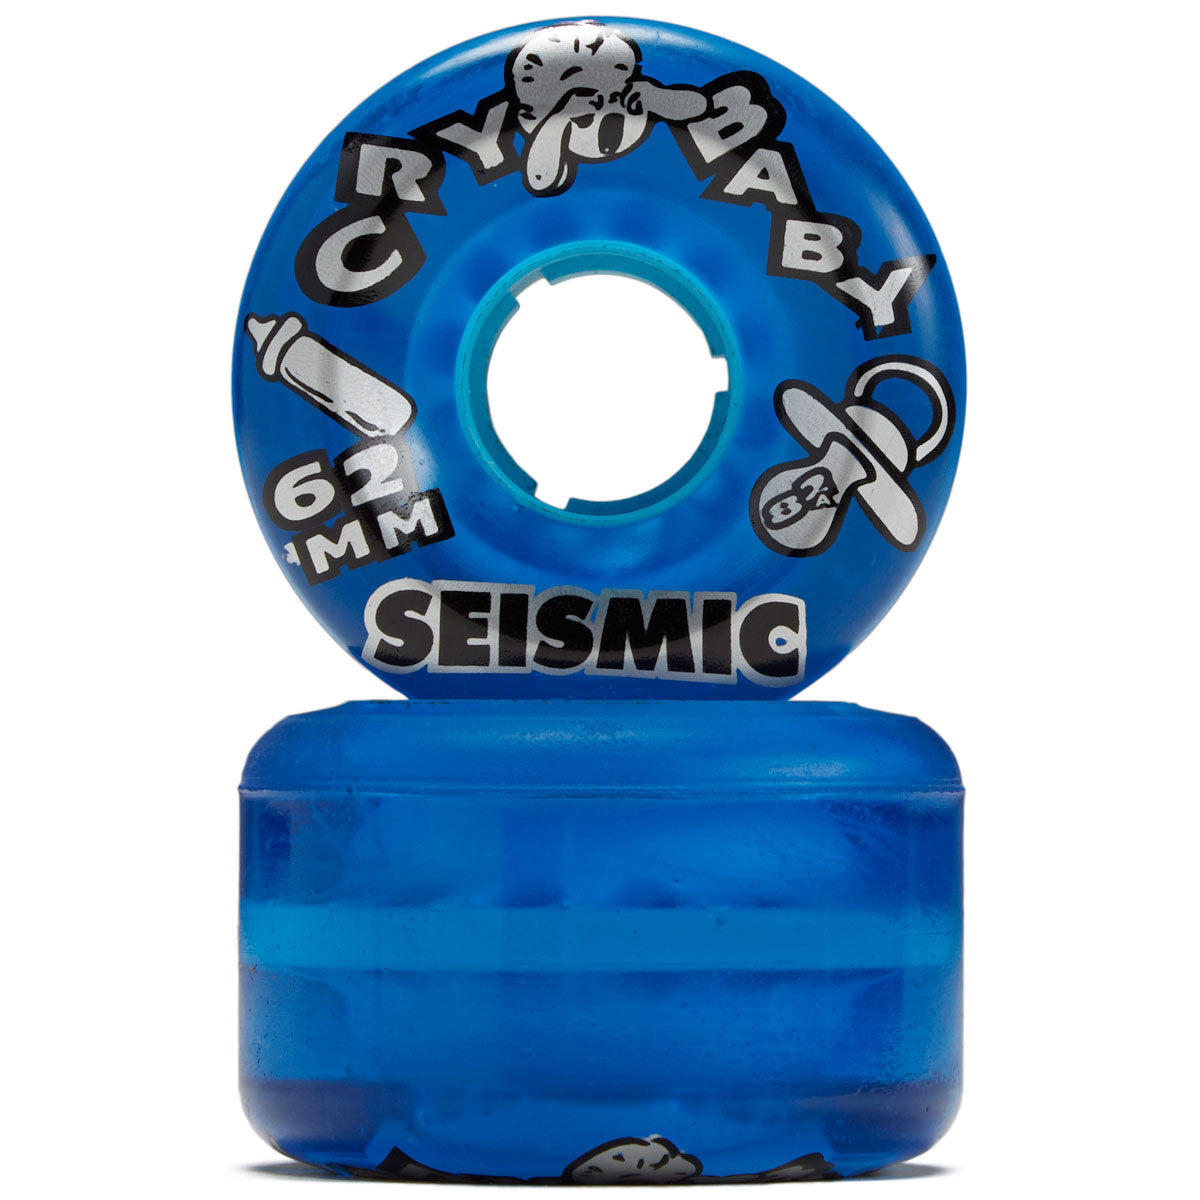 Seismic Crybaby 82a Longboard Wheels - Clear Blue - 62mm image 2